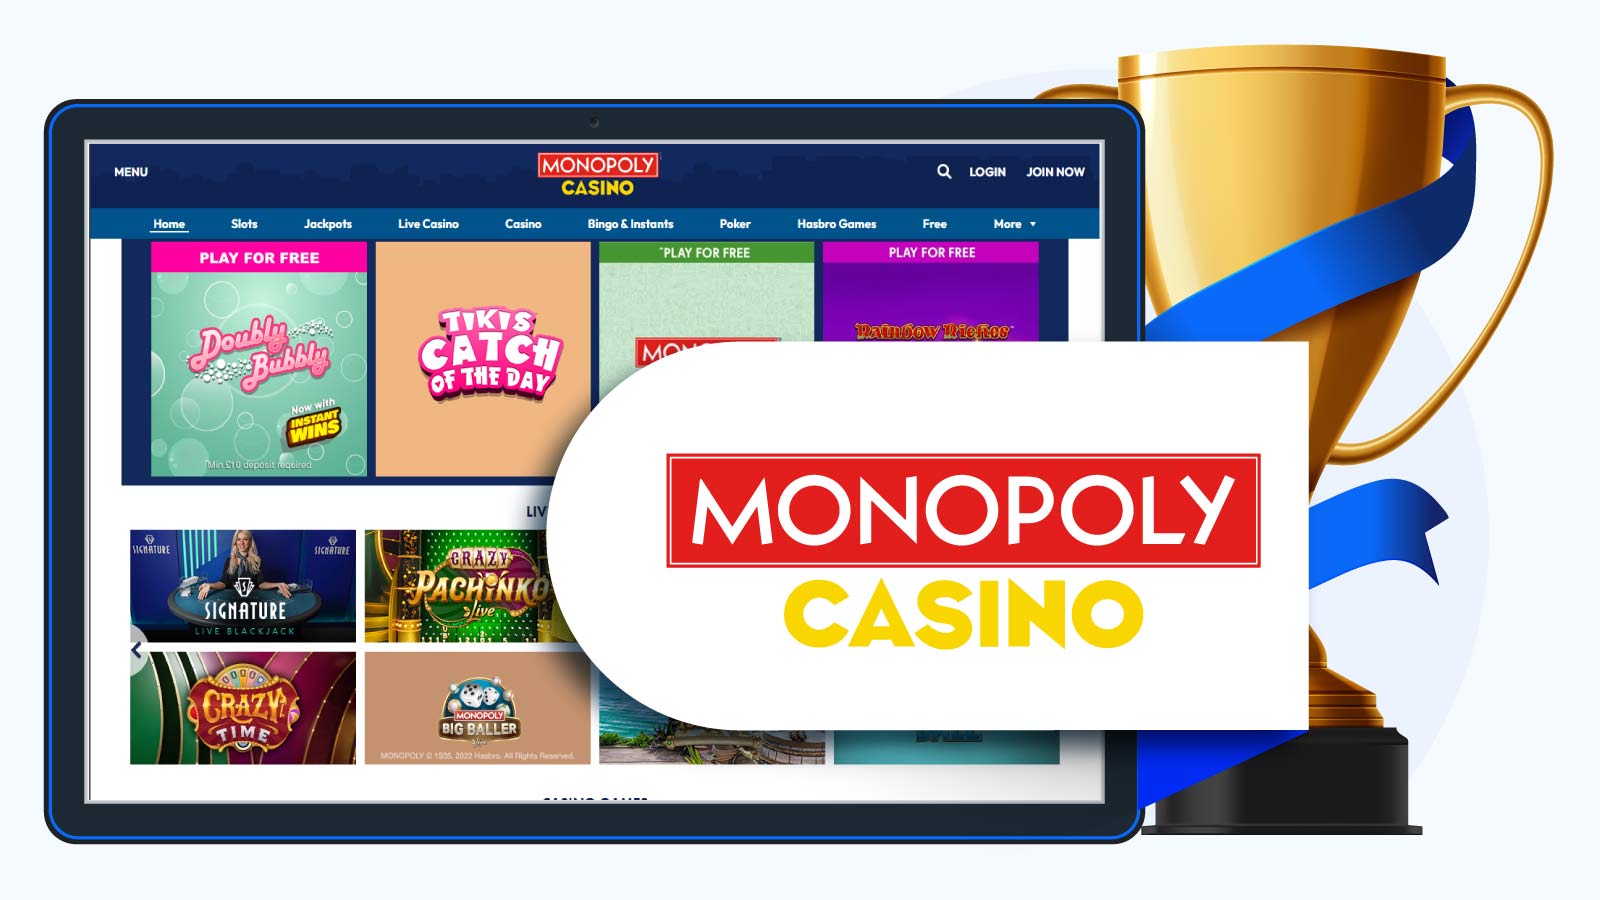 Monopoly Casino – The Best IGT Casino UK in April